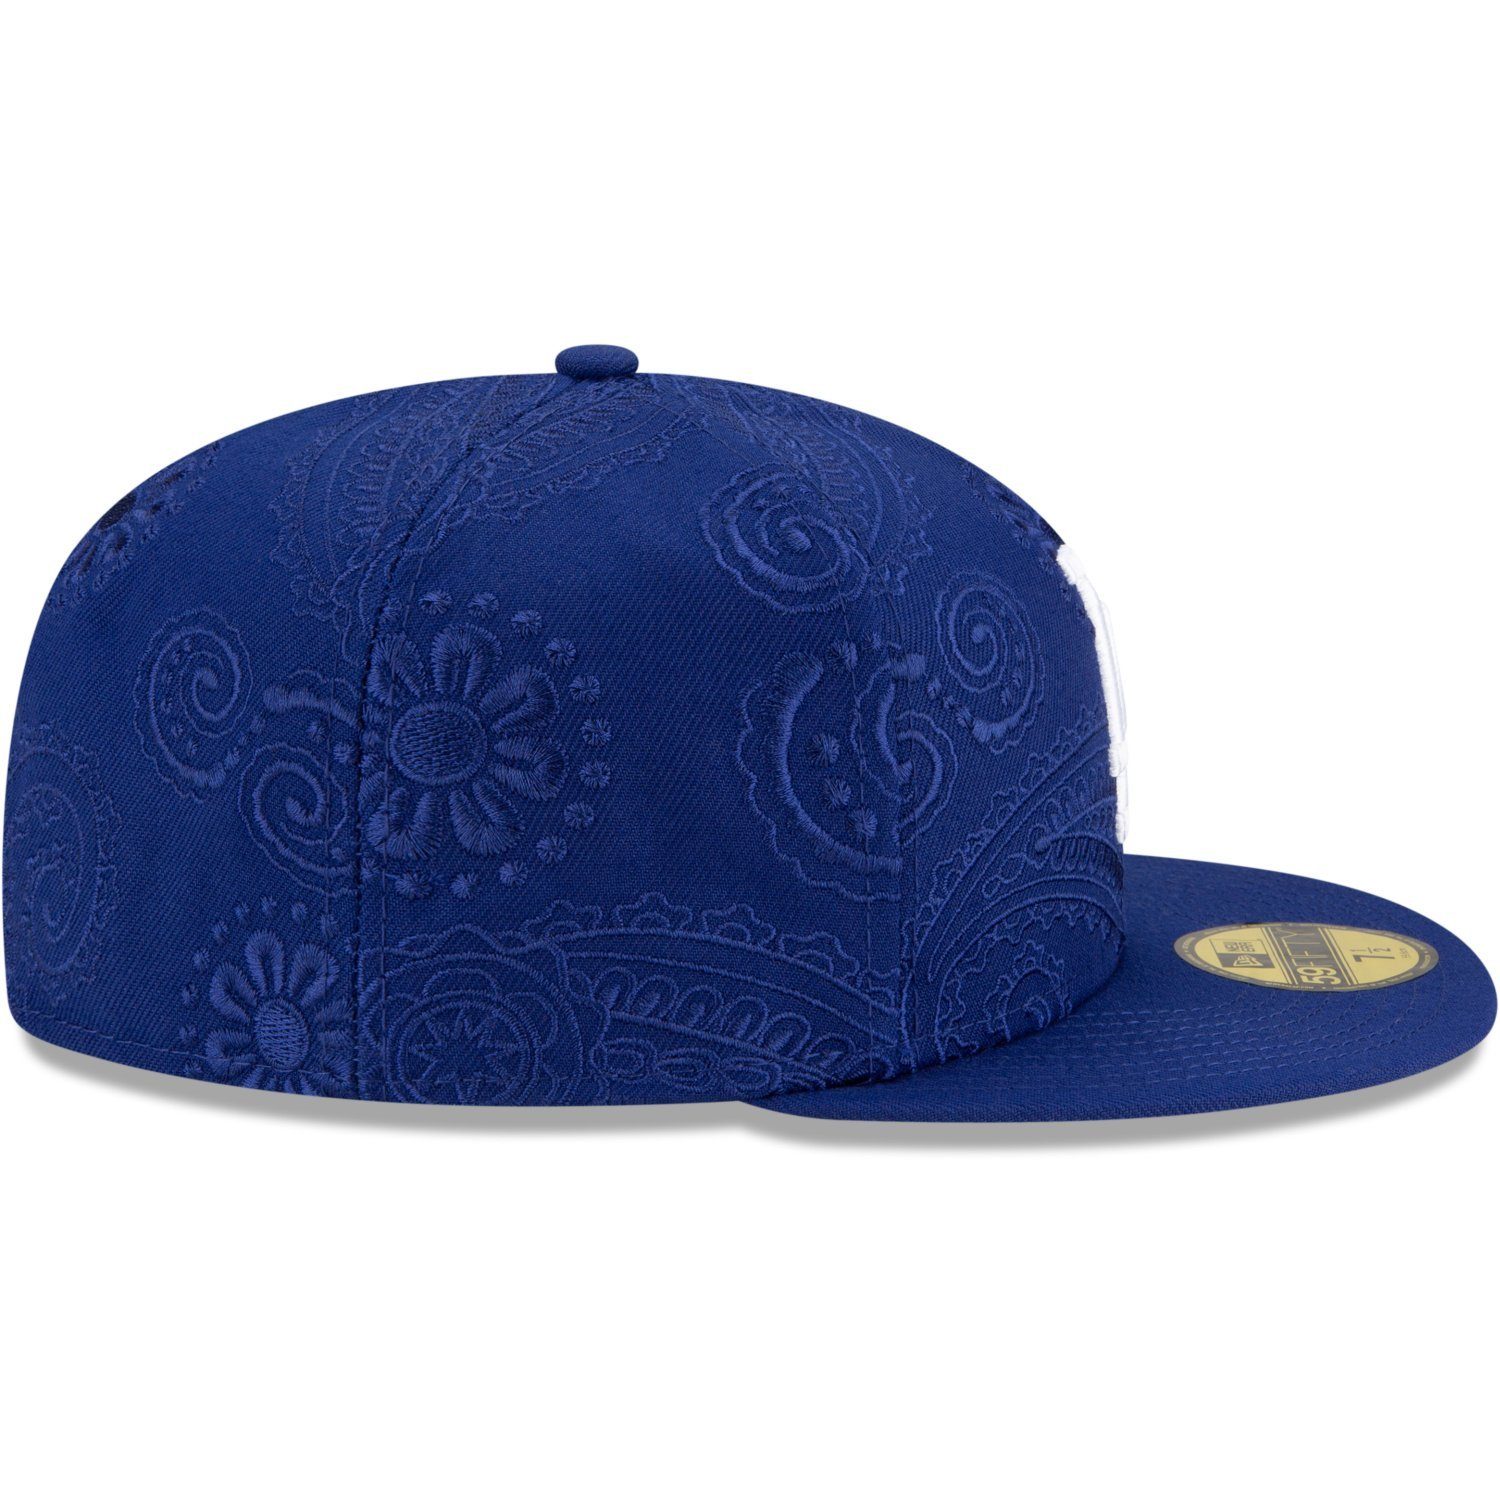 SWIRL New Fitted PAISLEY Angeles Cap Los Era Dodgers 59Fifty